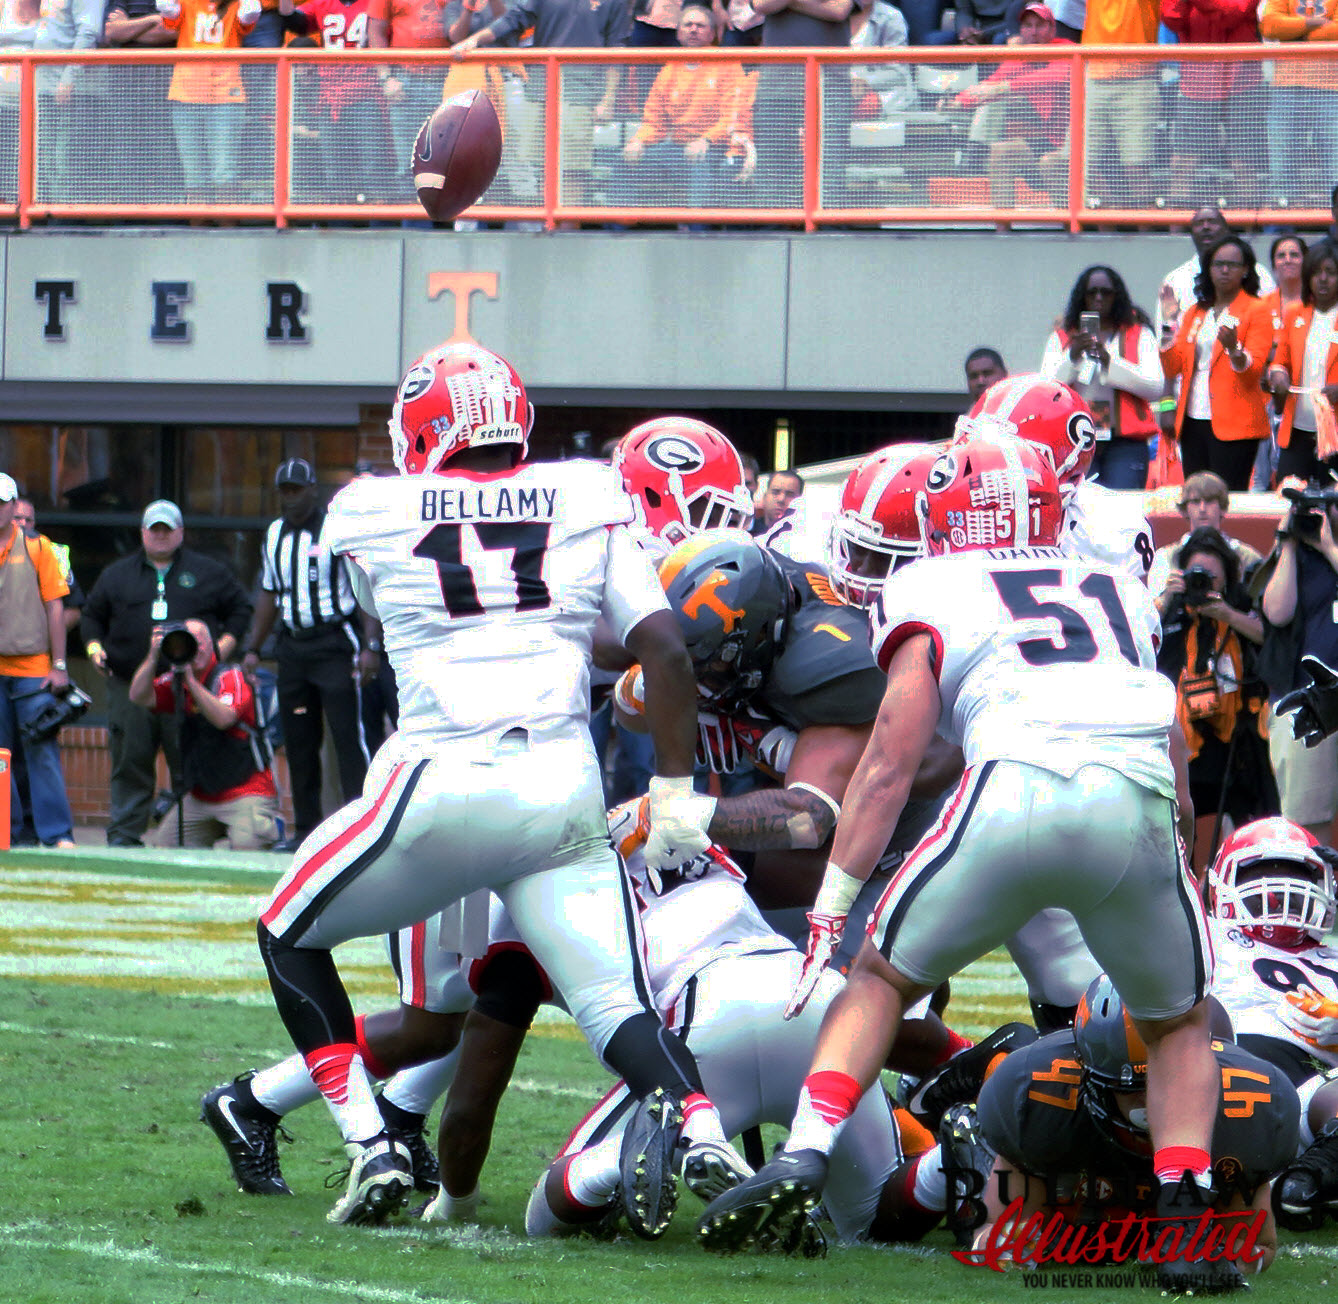 Davin Bellamy searches for the football vs. Tennessee 2015 Photo: Greg Poole/Bulldawg Illustrated